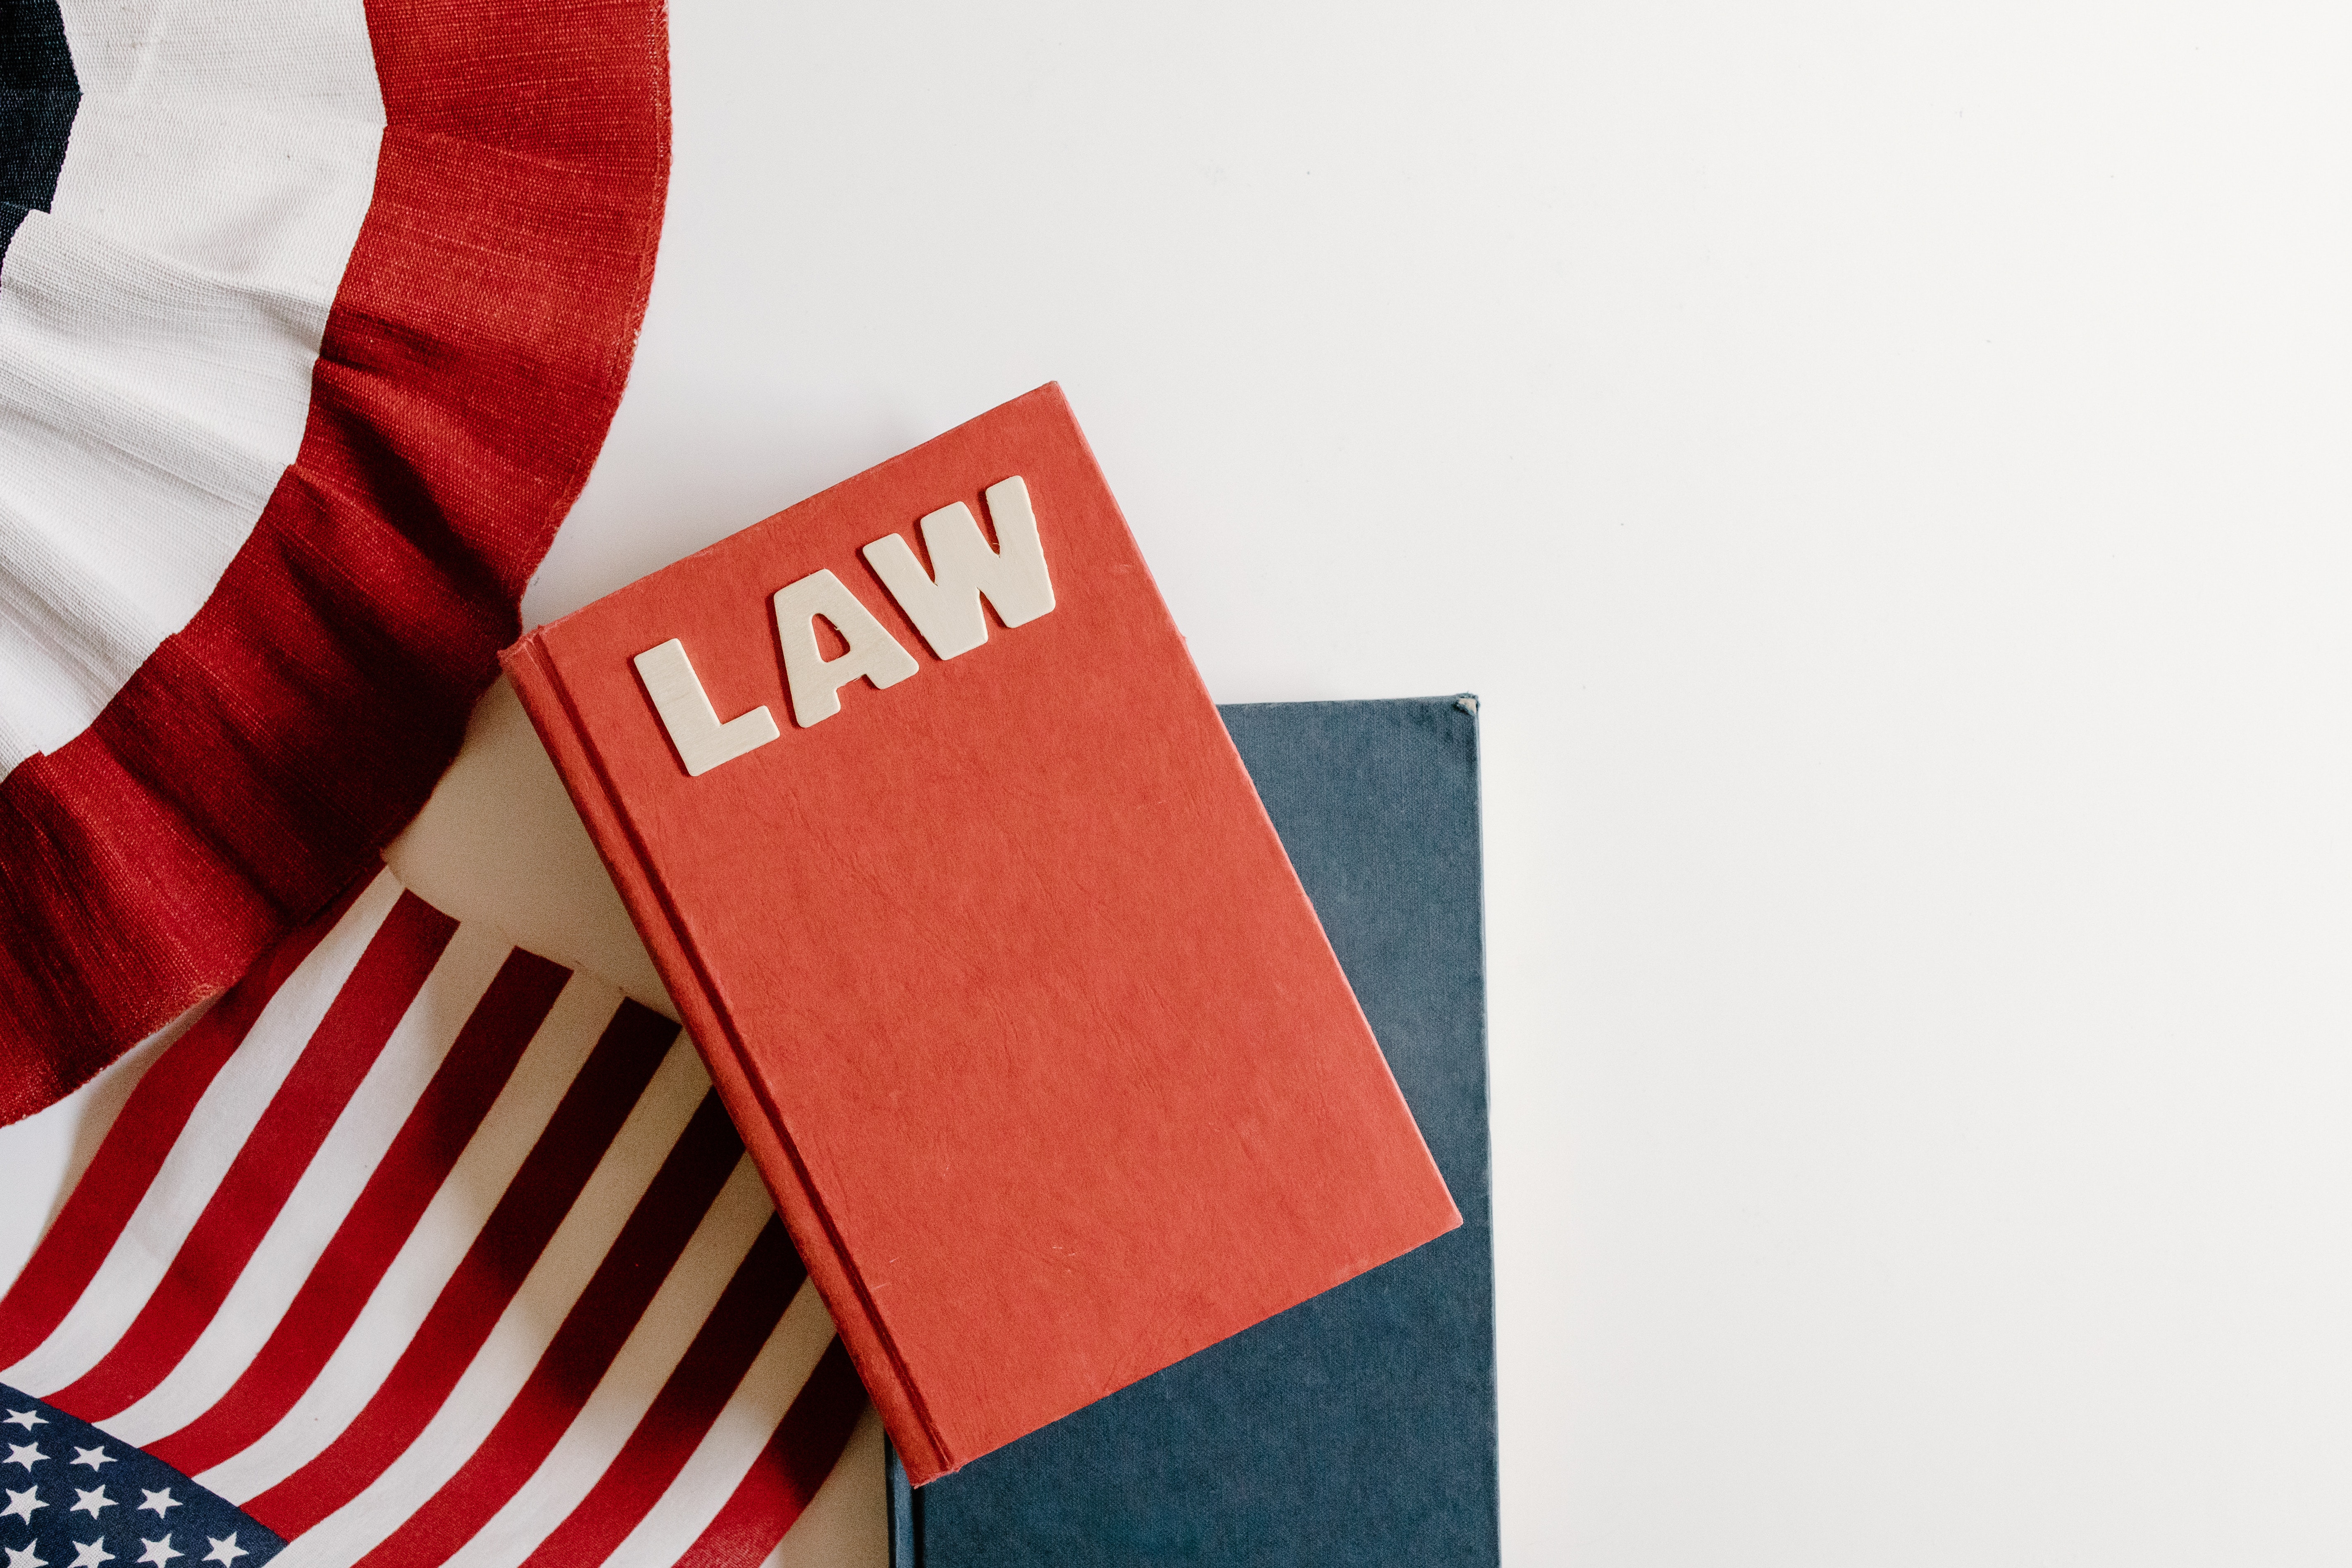 Some people need lawyers who specialize in certain fields, like immigration law, intellectual property law, or criminal defense. Here you will find all the major types of in-demand lawyers.